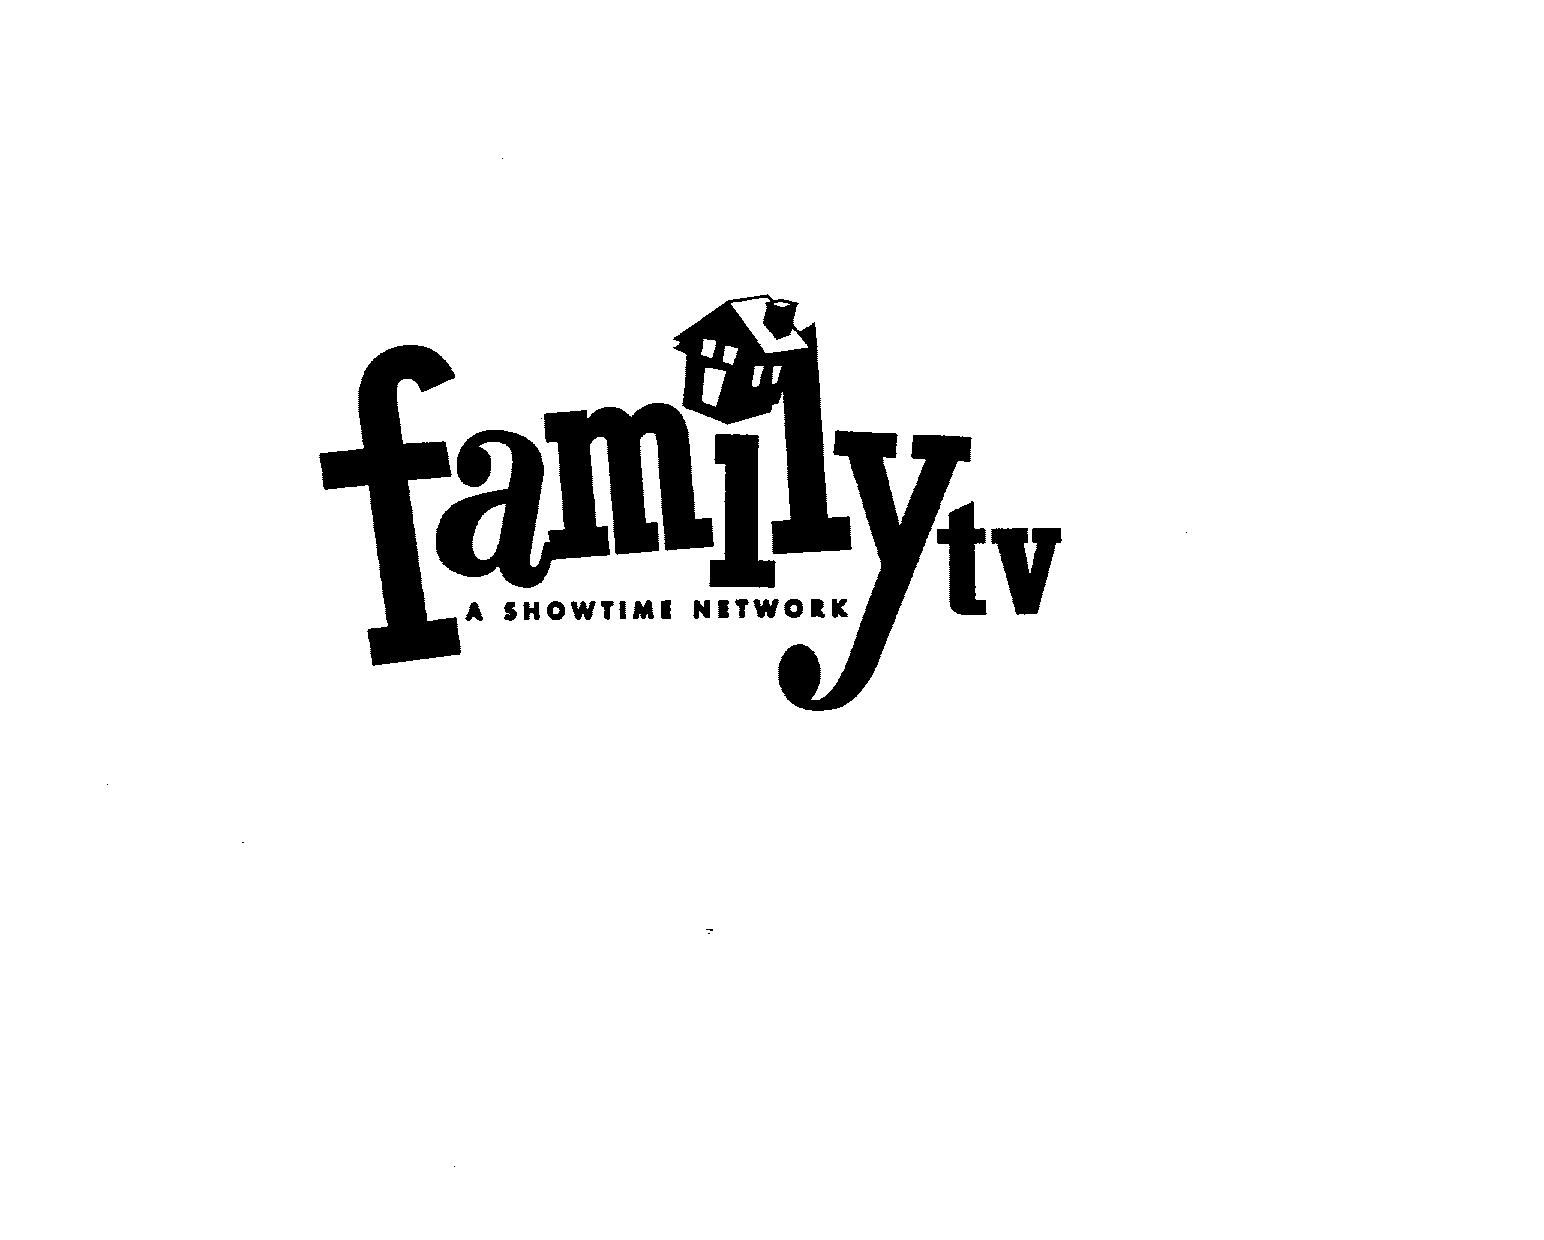  FAMILY TV A SHOWTIME NETWORK